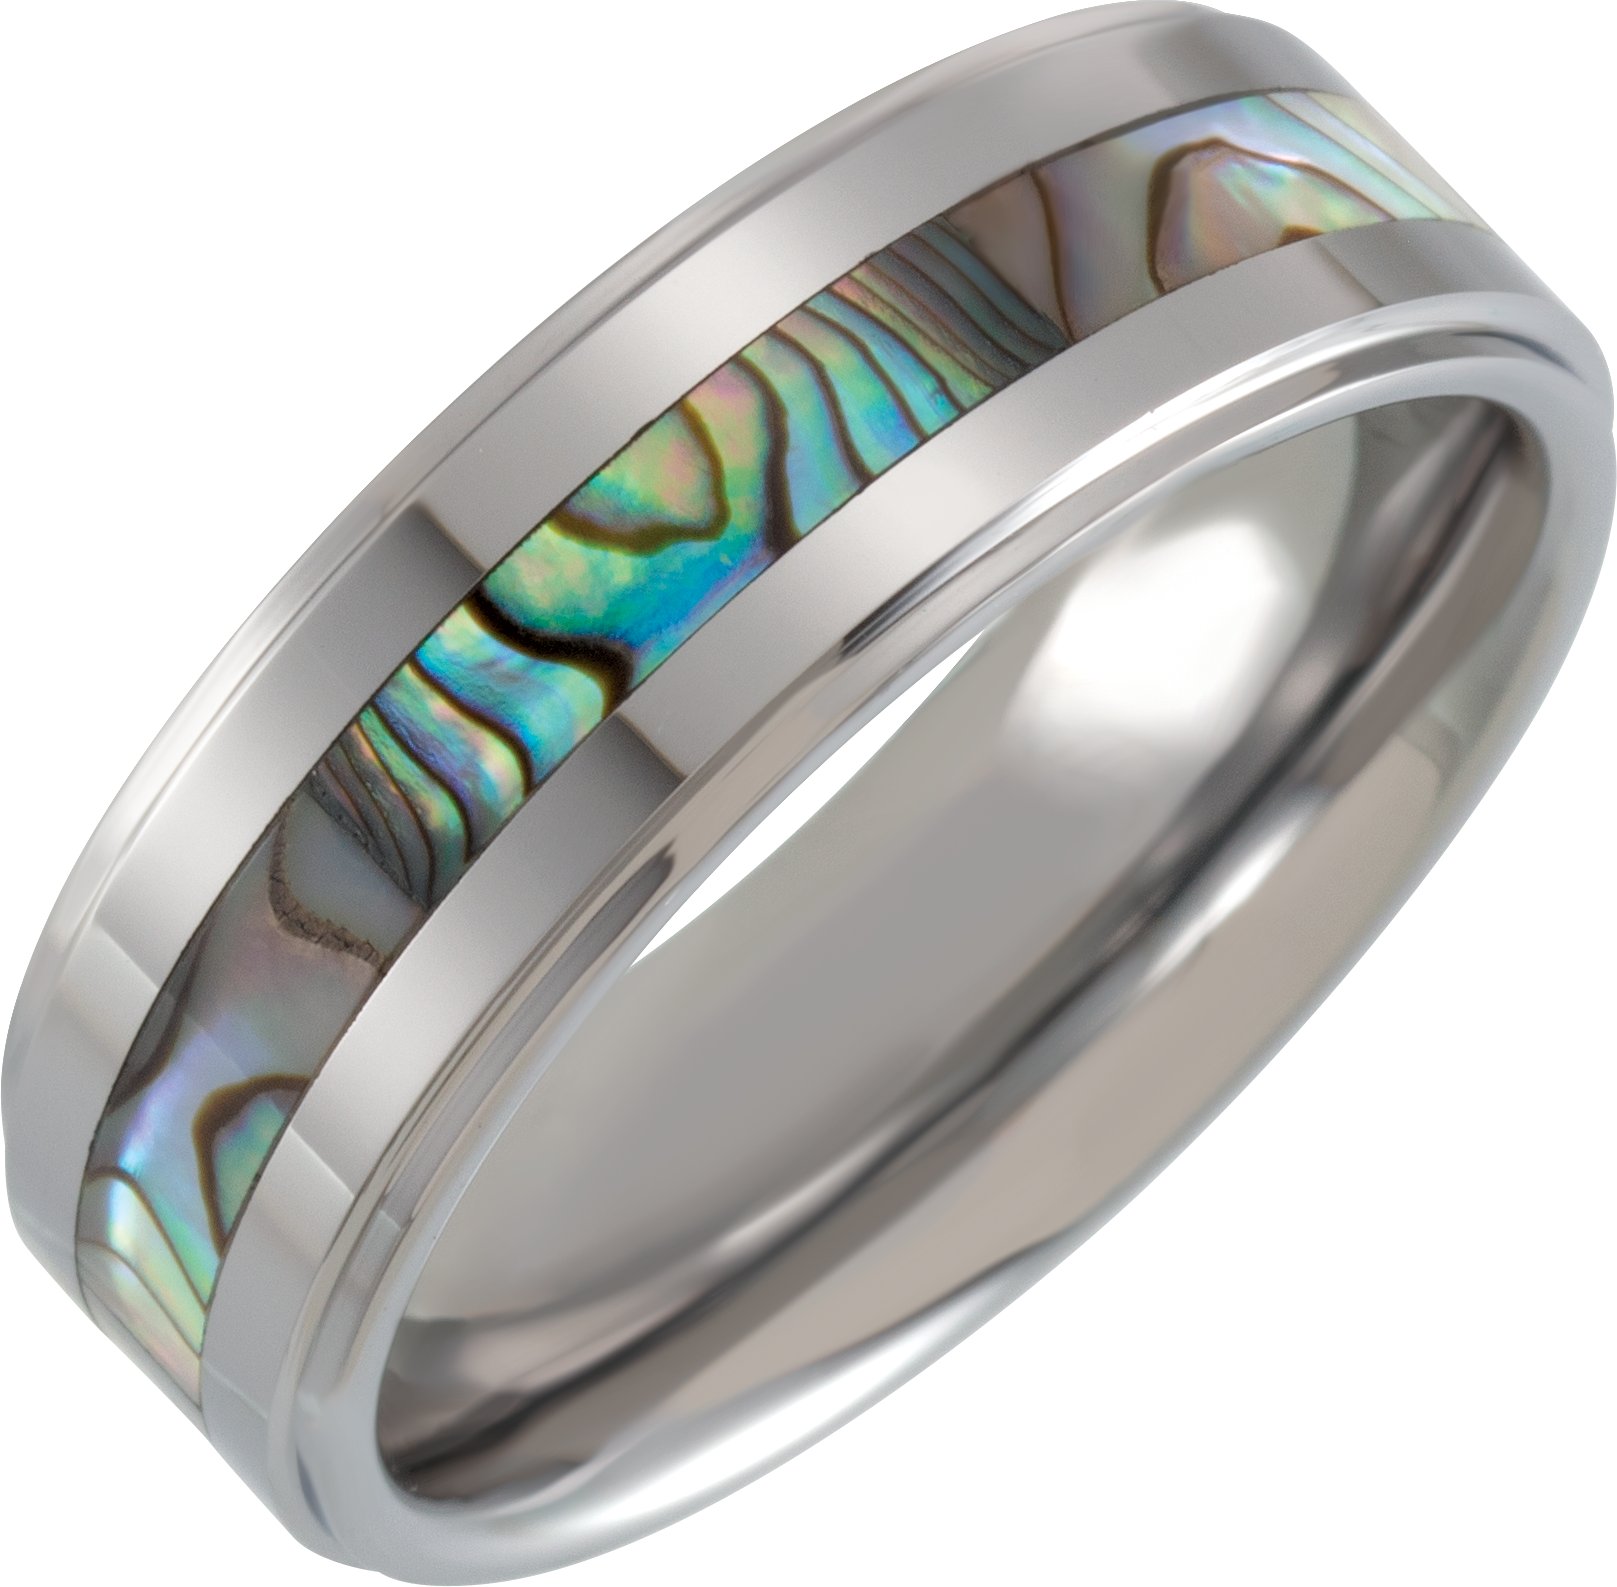 Tungsten 8 mm Flat Stepped Band with Mother of Pearl Inlay Size 13.5